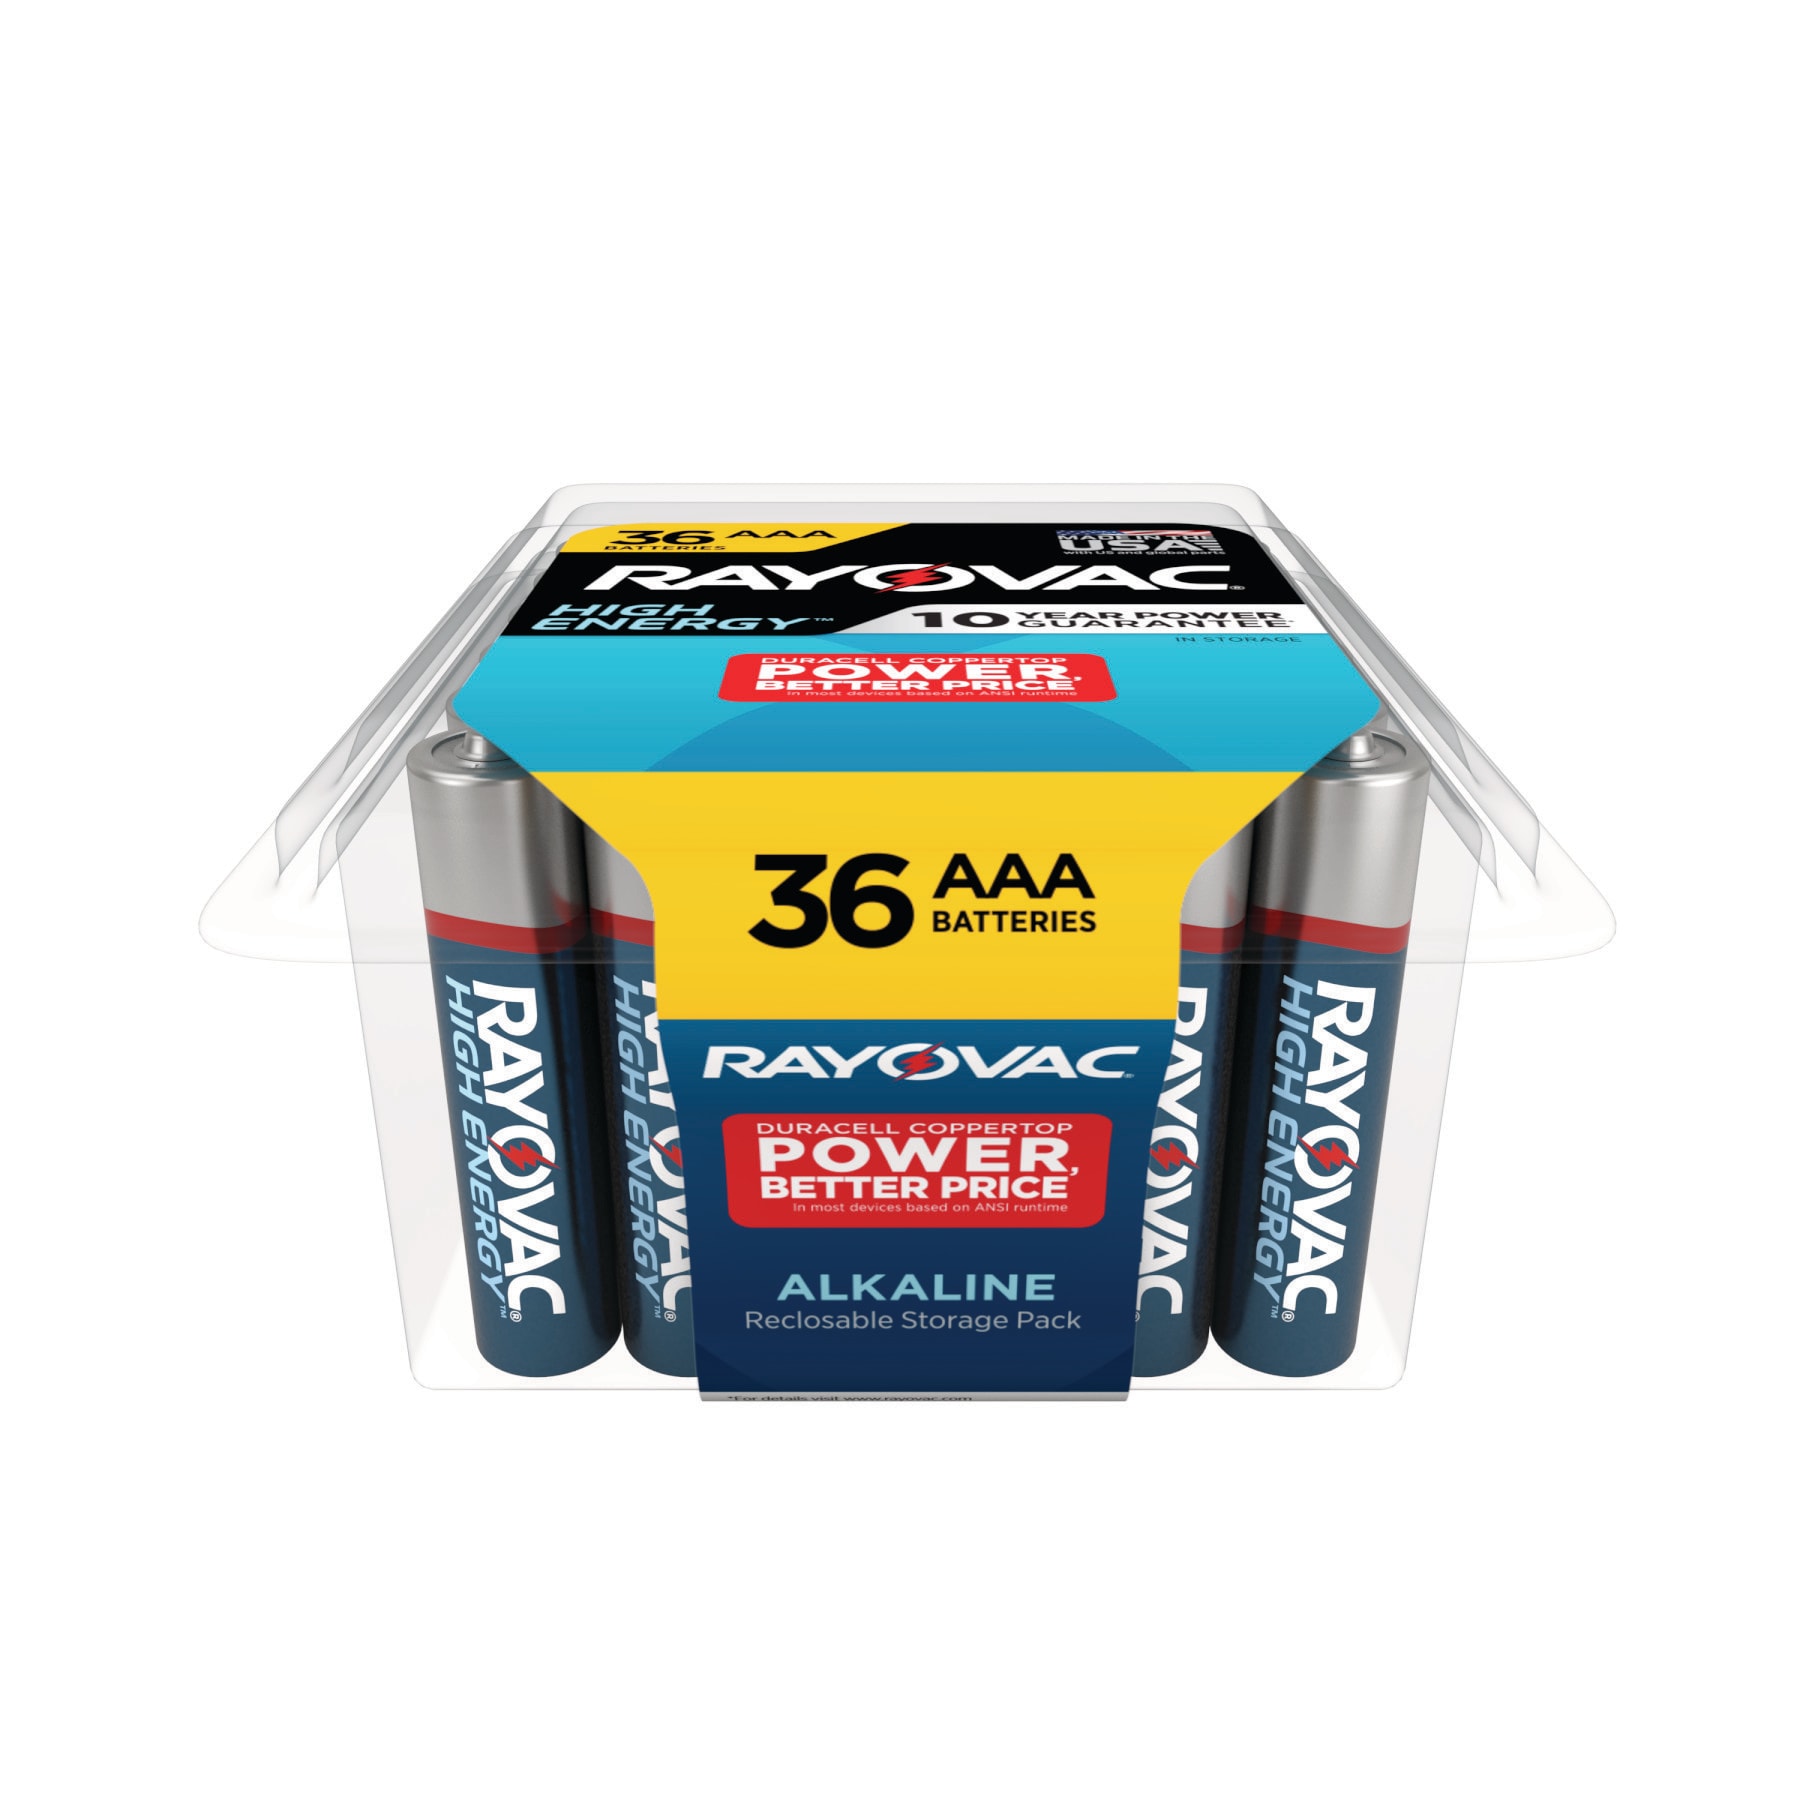 Energizer MAX AAA Batteries (48 Pack), Triple A Alkaline Batteries - All  American Automotive Supply